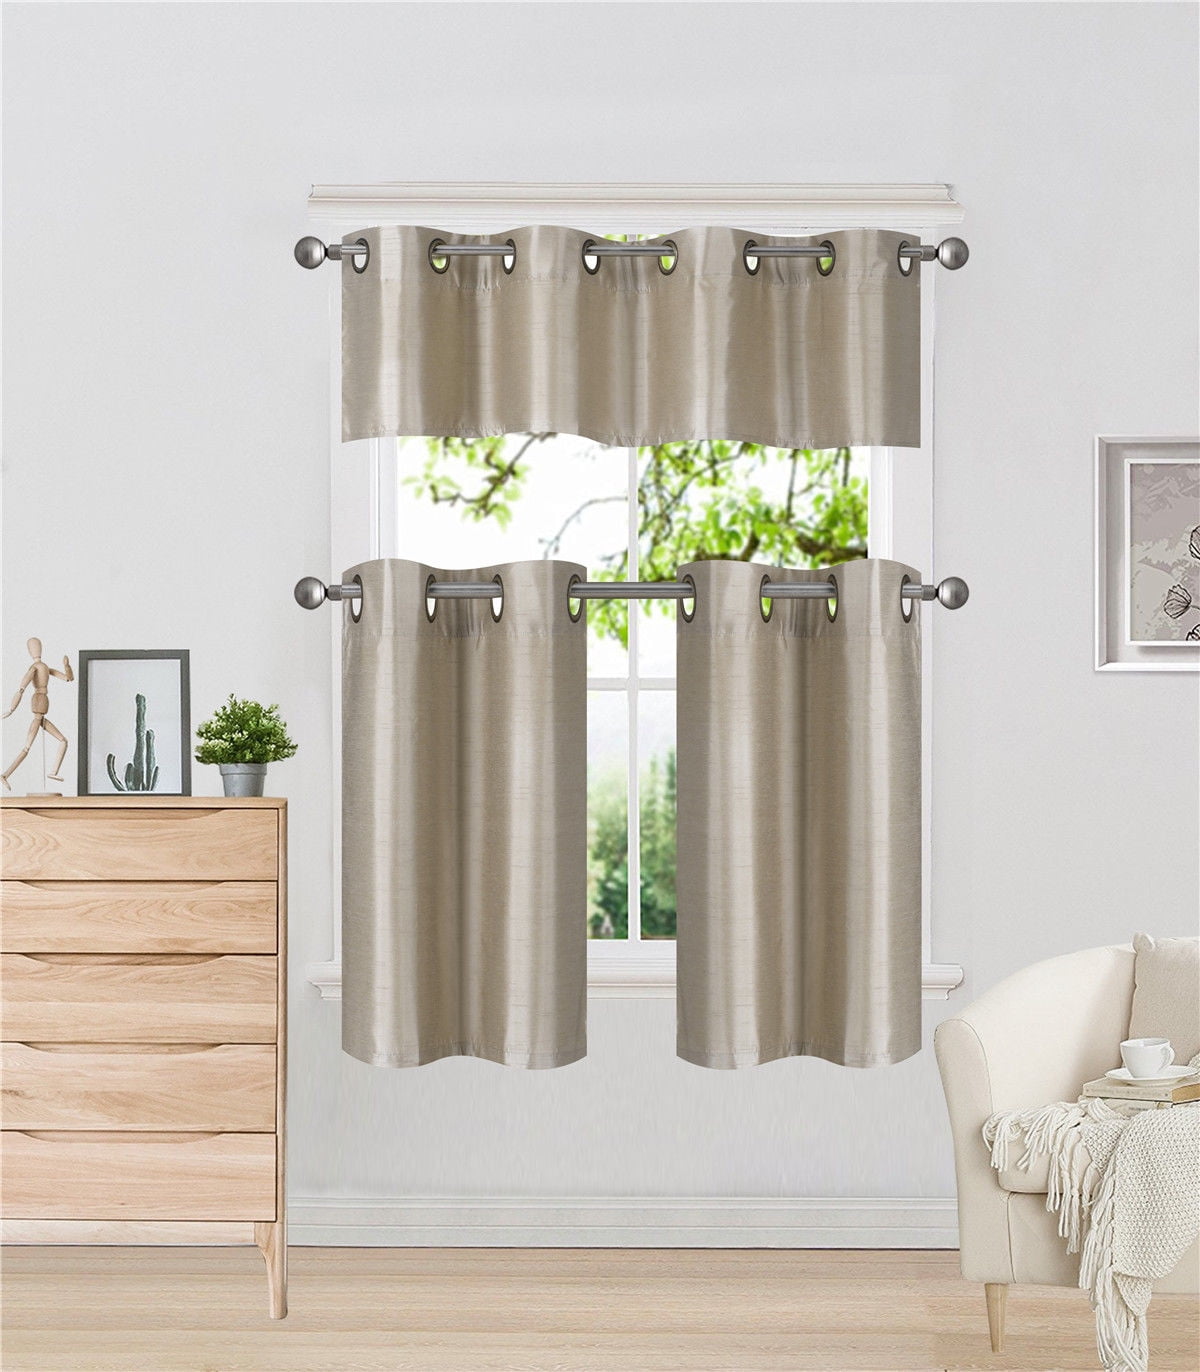 Blackout Thermal Insulated Valance Curtain ï¼ˆ52 W x 18 Hï¼‰ Short Kitchen Curtain LIOOBO Window Curtain Valance Small Cabinet Curtains 